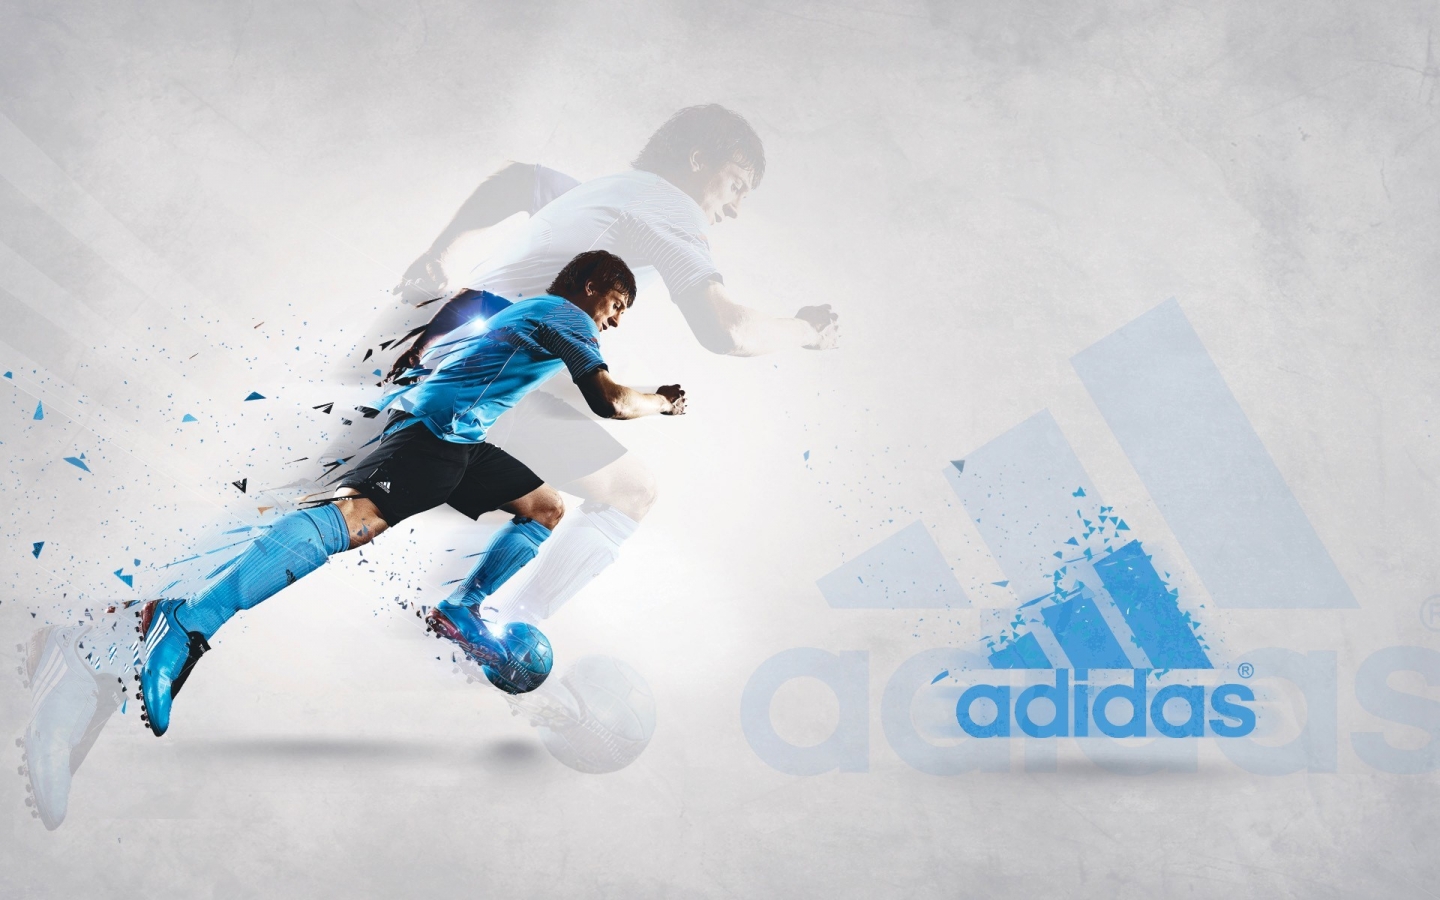 Adidas Poster for 1440 x 900 widescreen resolution